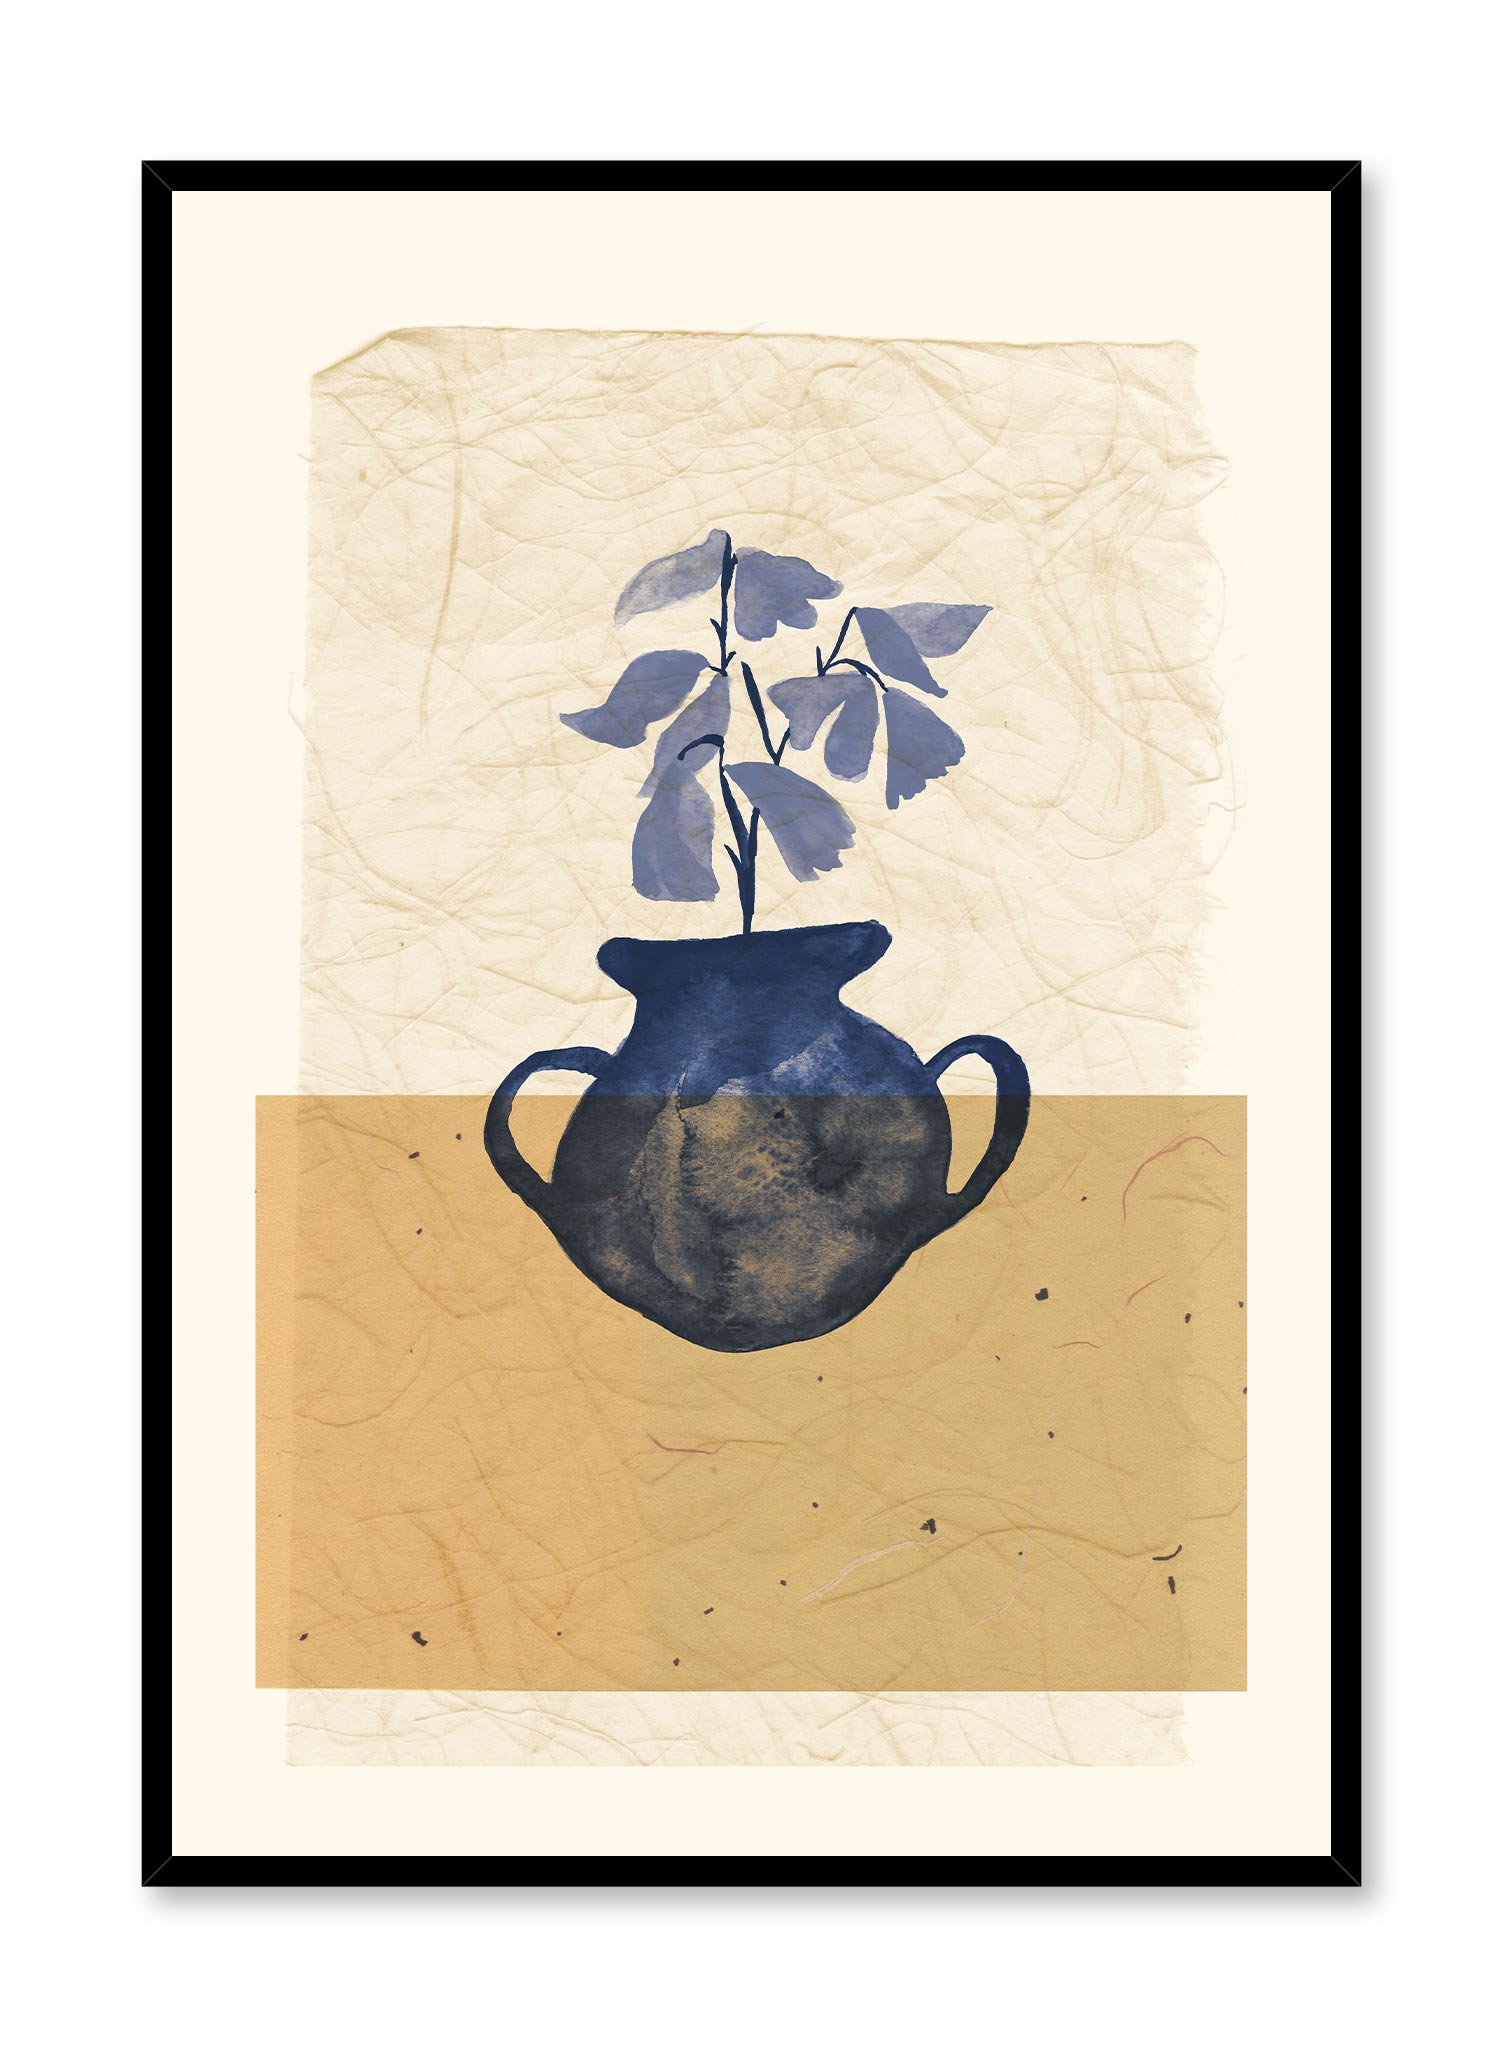 Rice Paper Still Life is a minimalist illustration by Opposite Wall of a double-handle blue vase with blue bell flowers.